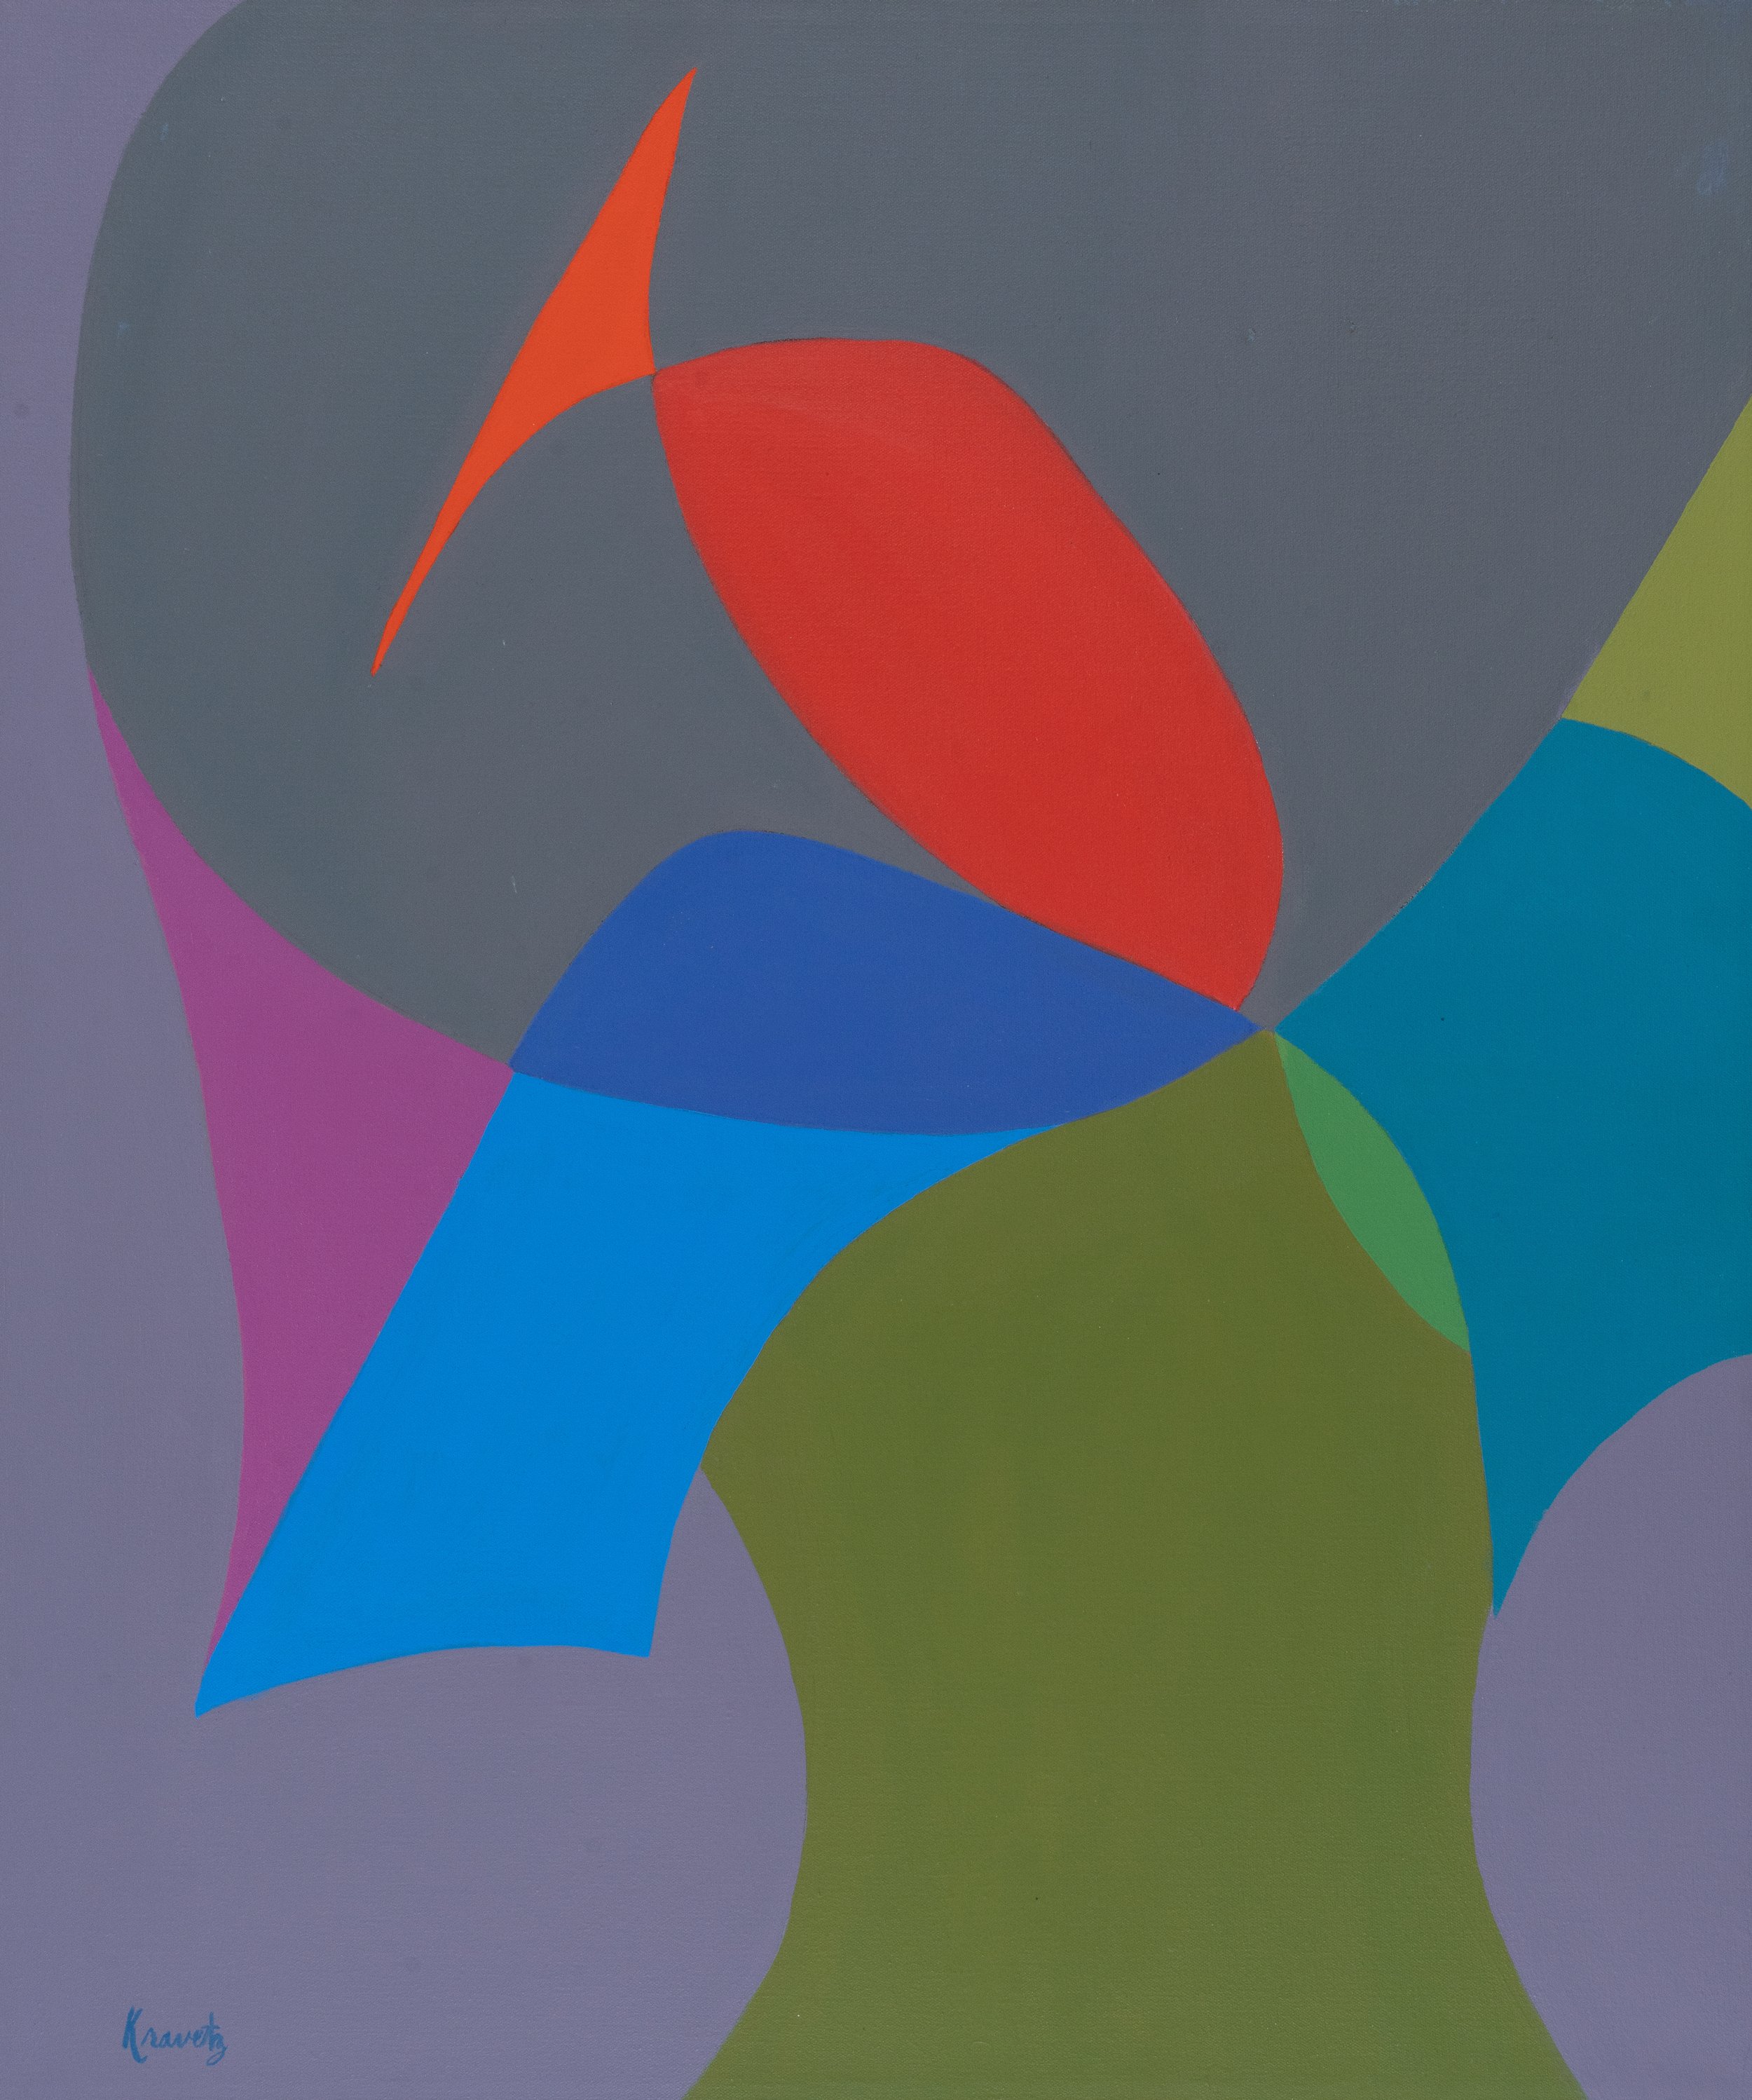 Floral Inspiration, 1975, acrylic on canvas, 28x24 inches